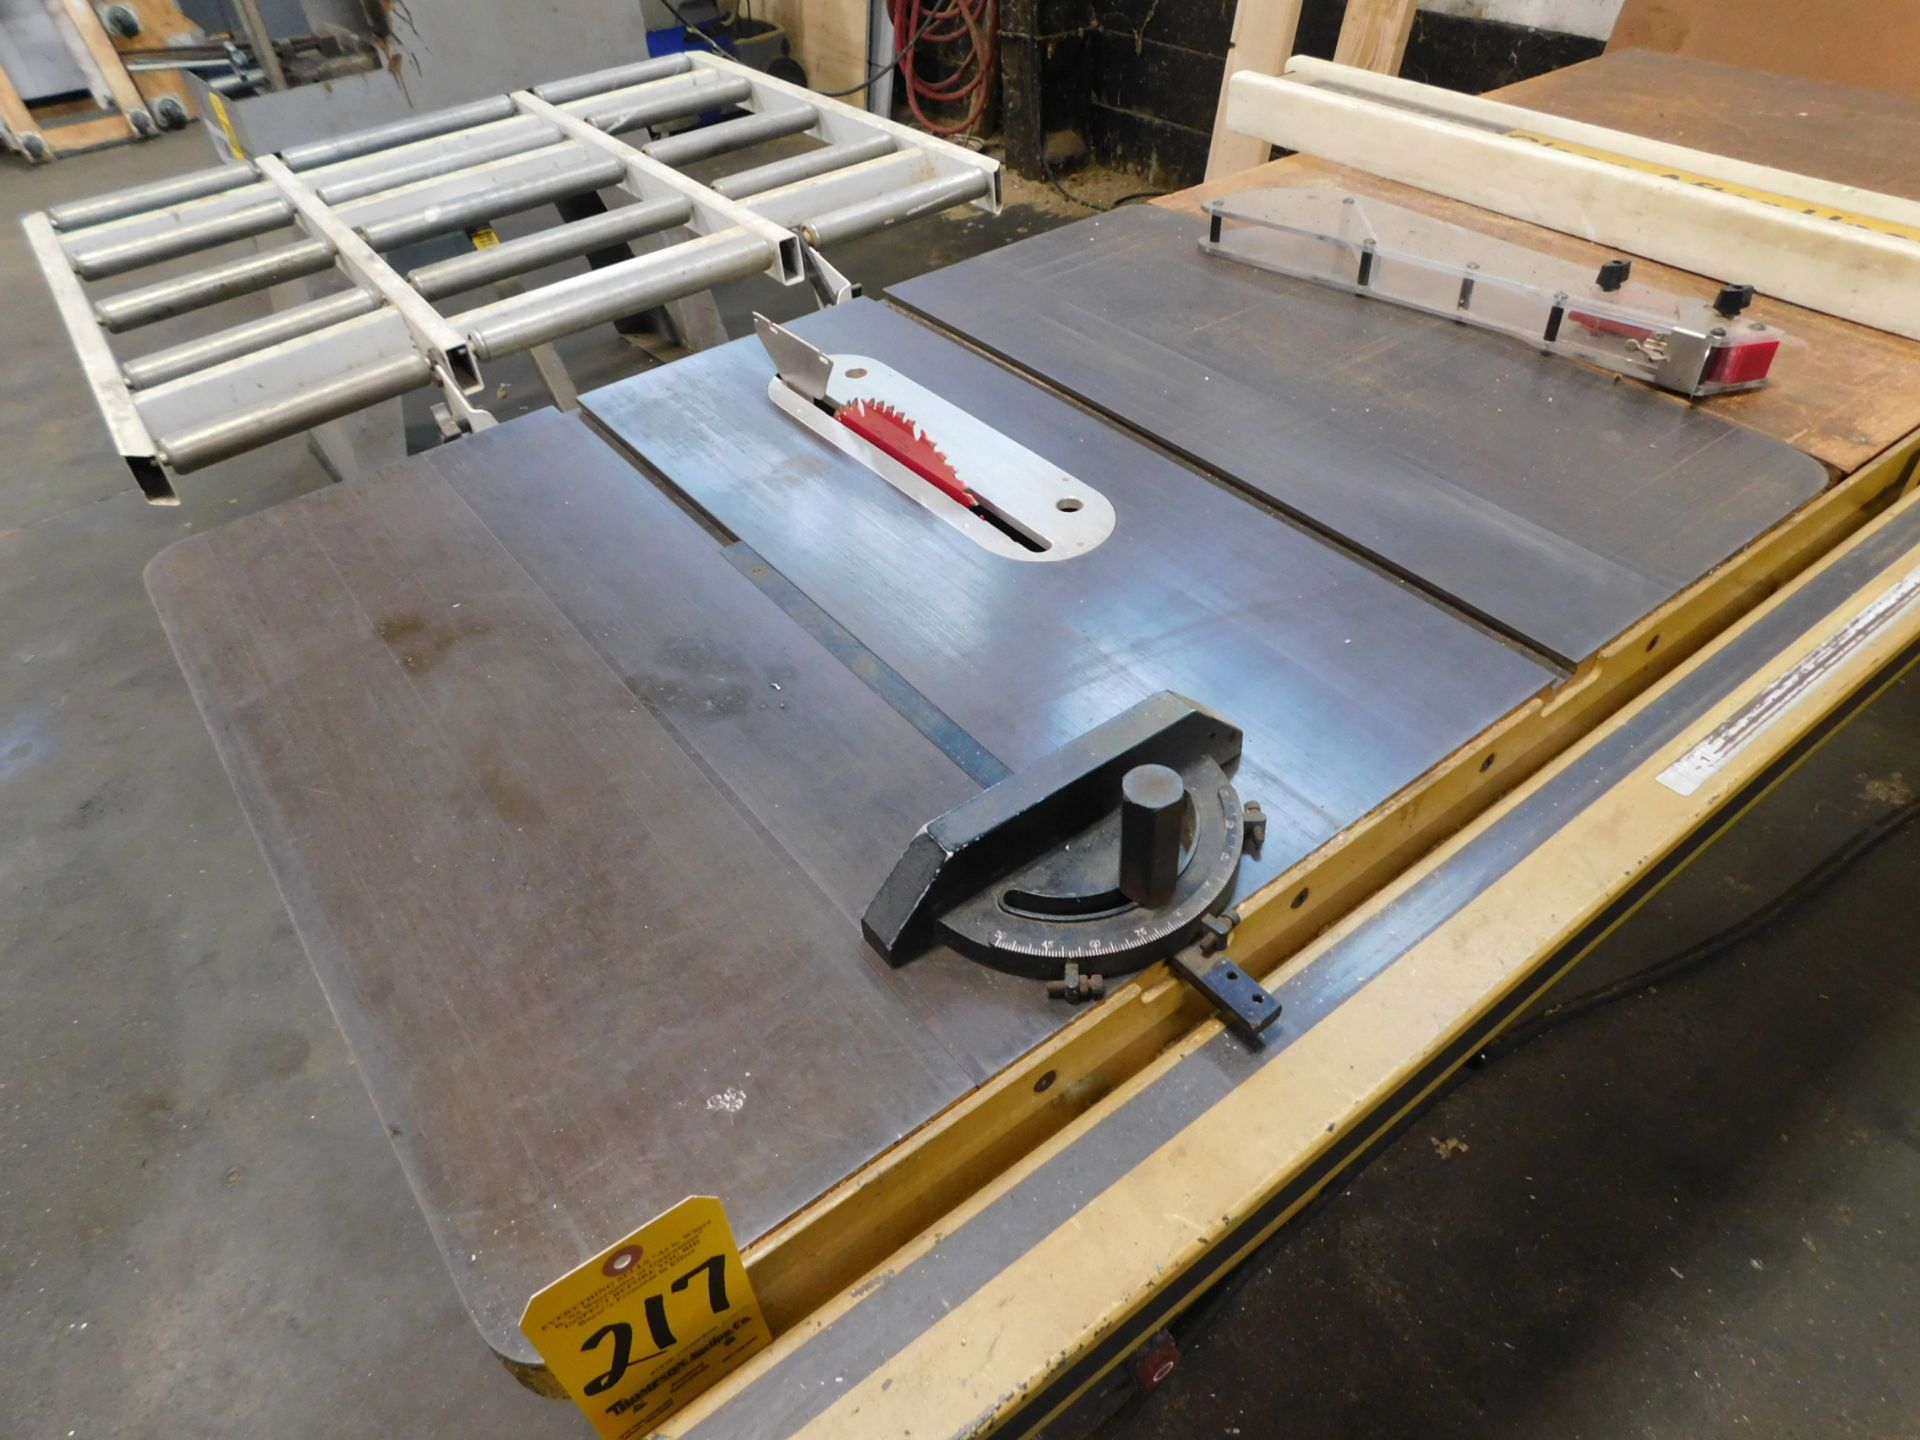 Powermatic Model 66, 10" Table Saw, s/n 93662581, with Fence and Miter Gauge, Loading Fee $100.00 - Image 2 of 6